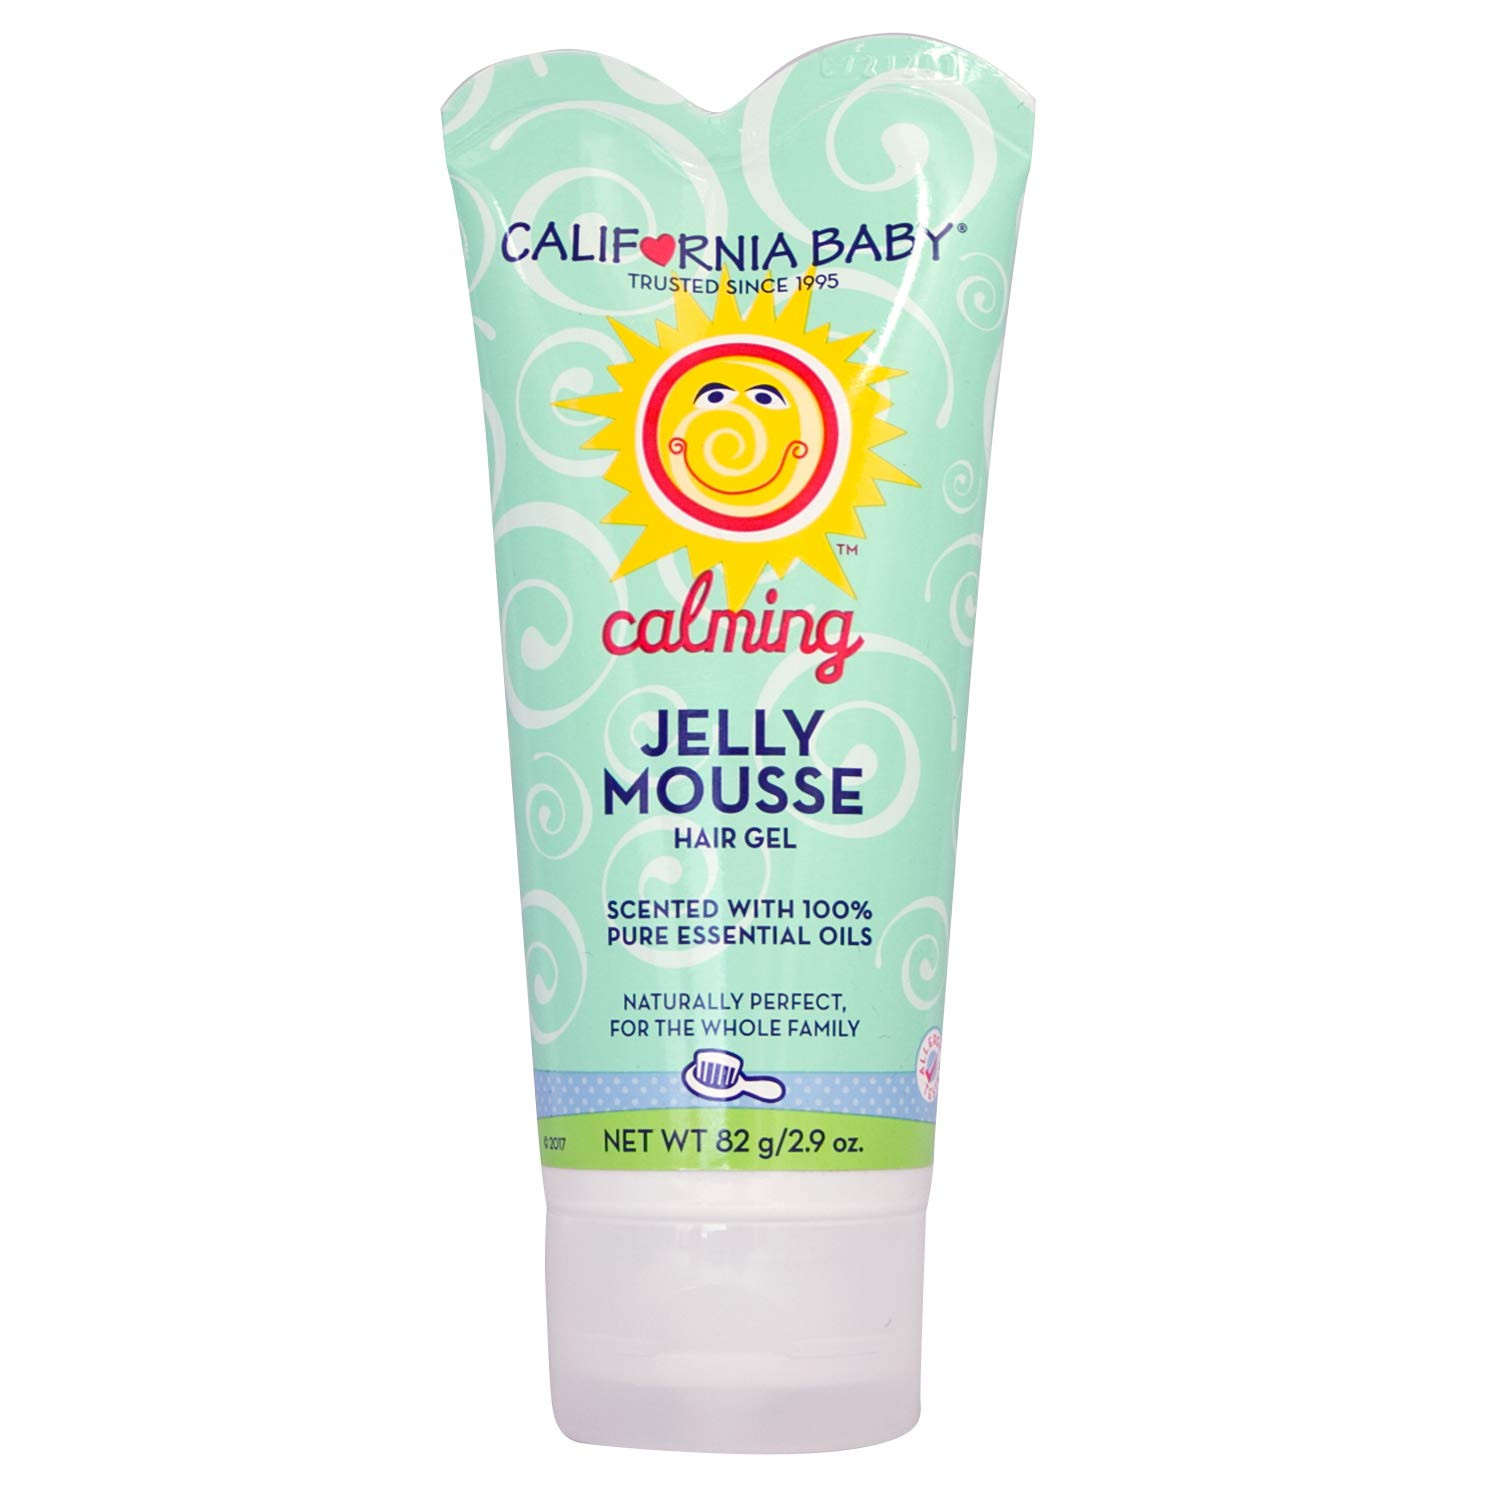 California Baby Jelly Mousse
 The 11 Best Kids Hair Gel & Reviews In 2020